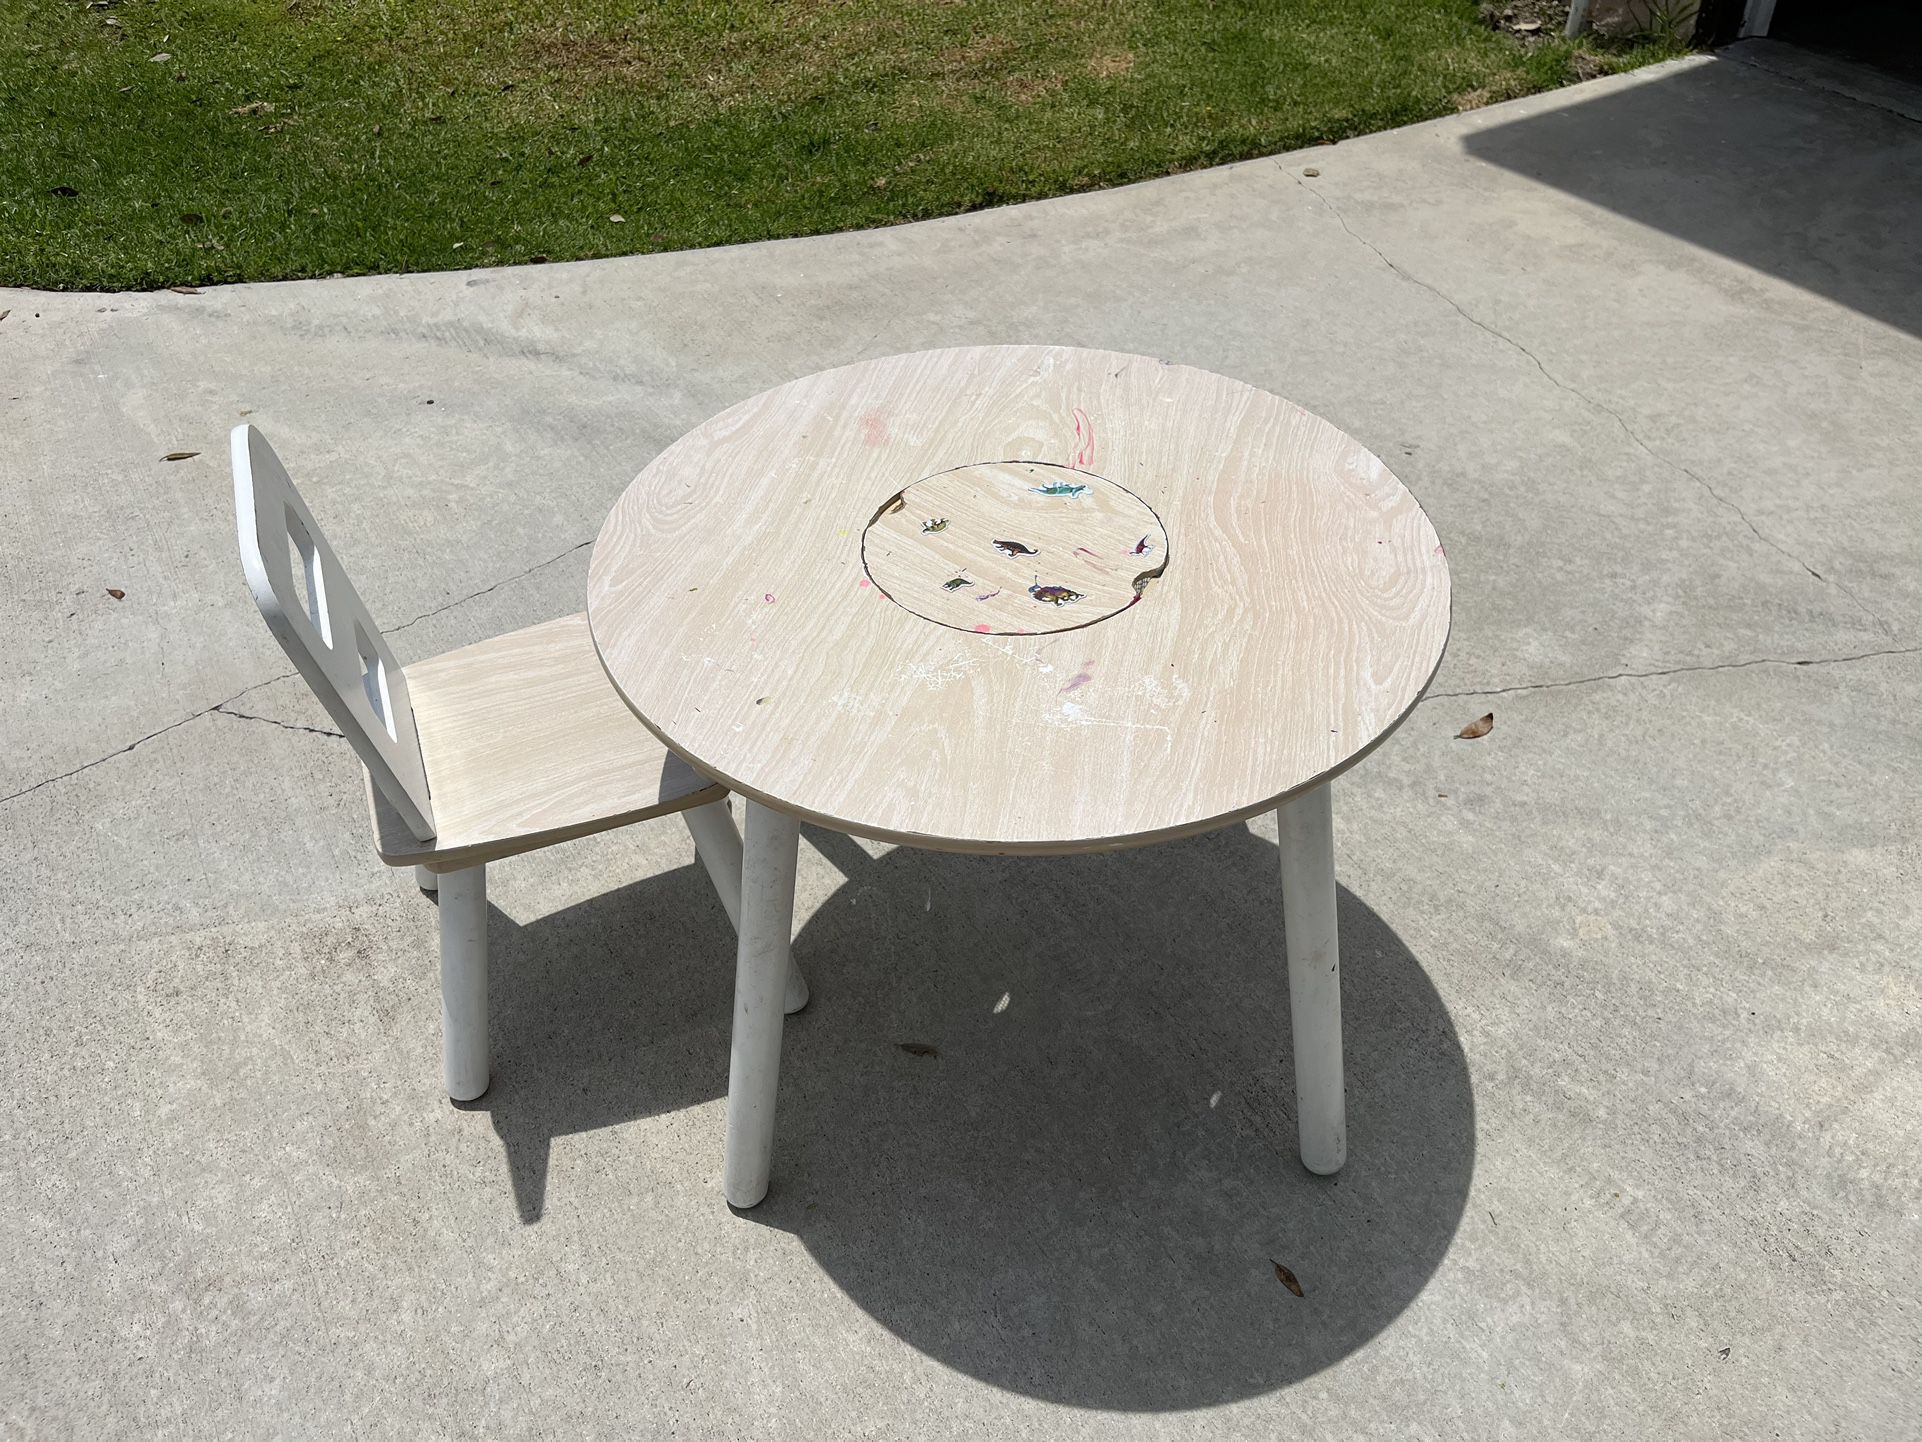 FREE KIDS TABLE & CHAIR 